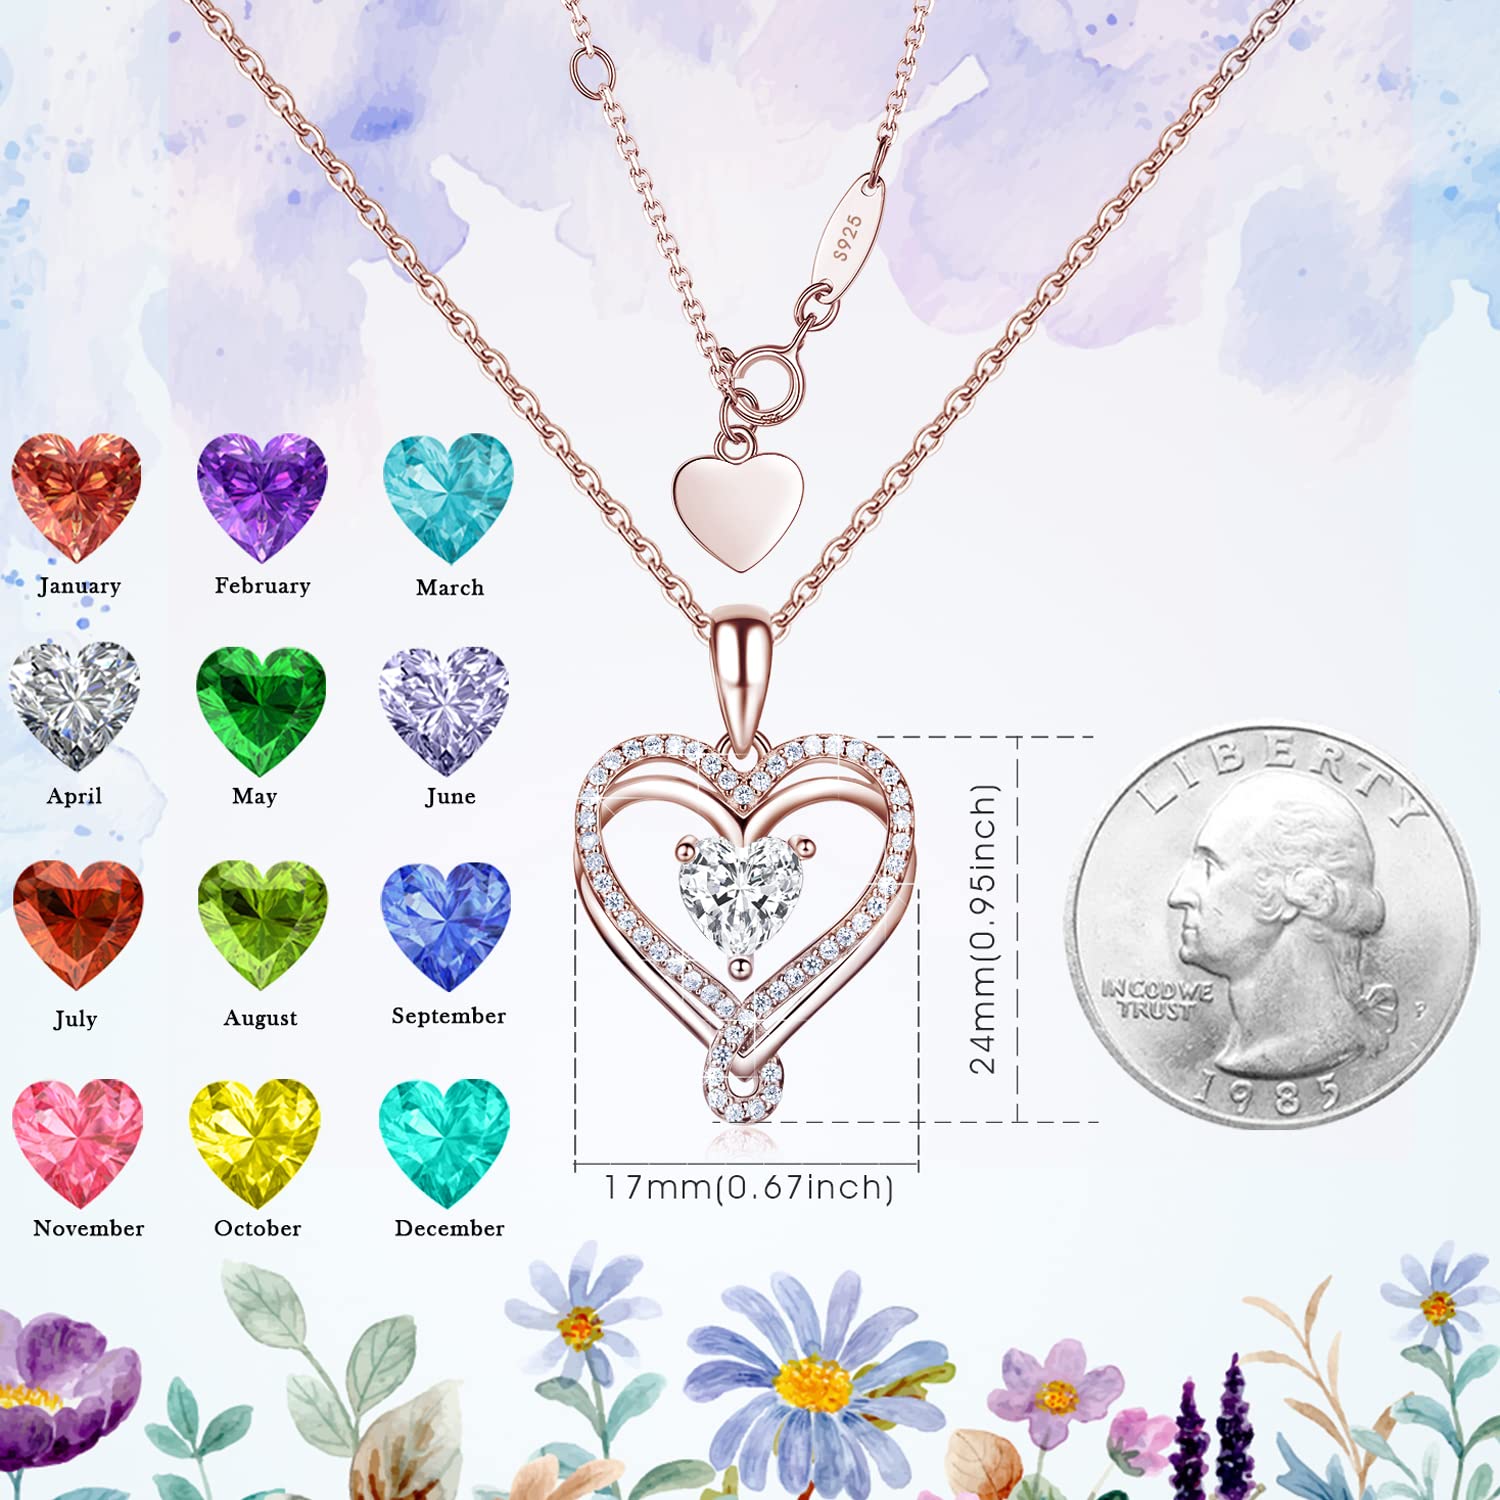 Infinity Heart Birthstone Necklace for Women 18K Rose Gold 925 Sterling Silver Birthstone Jewelry for Mom Daughter Wife Grandma Christmas Anniversary Birthday Gifts for Women Her from Husband Son Friend Diamond Pendant Necklaces